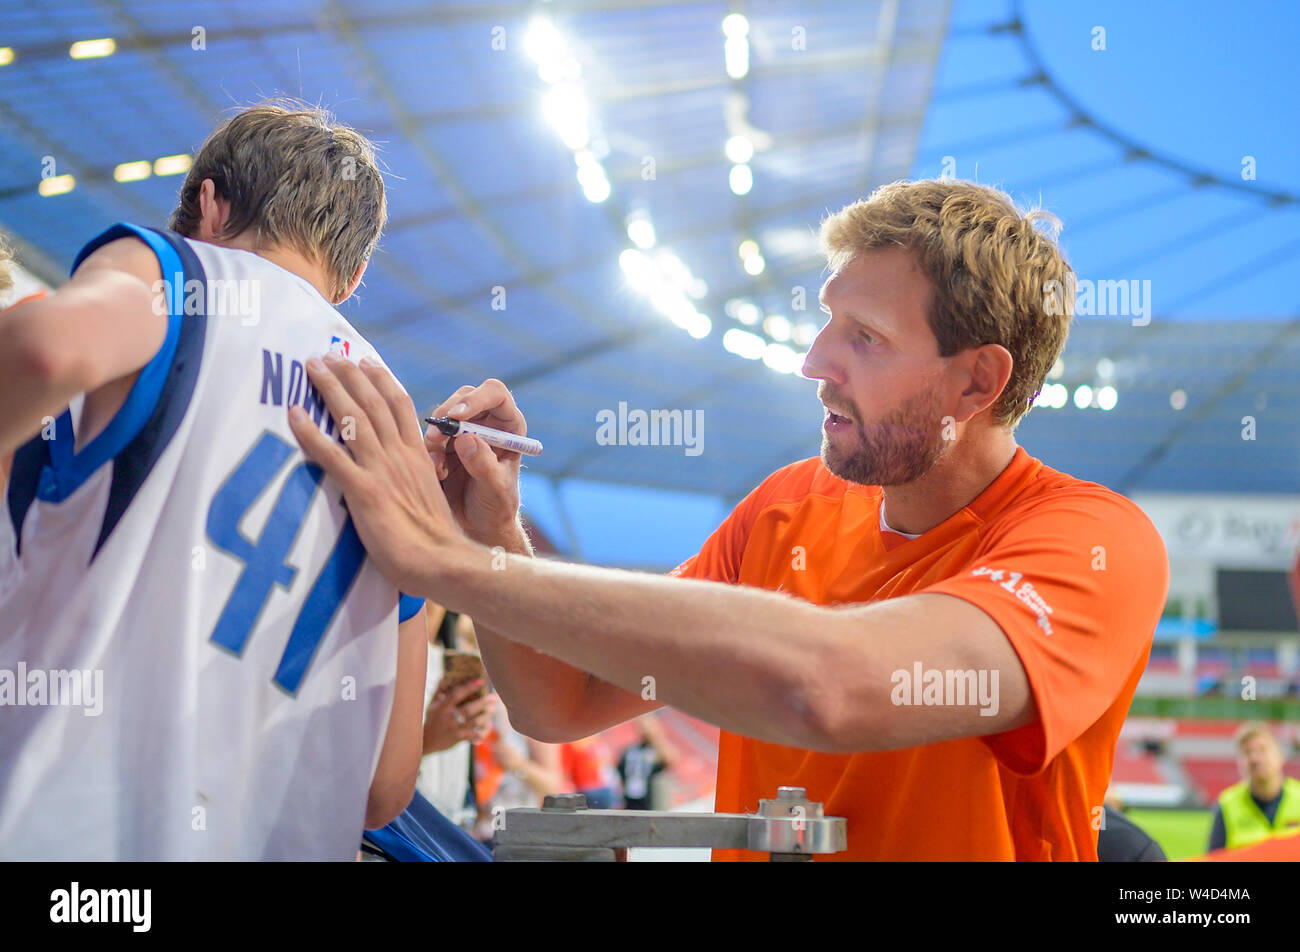 Leverkusen, Deutschland. 21st July, 2019. Dirk NOWITZKI signs an autograph  on his basketball jersey from Dallas Mavericks No. 41 Champions for  Charity, the charity football game in honor of Michael Schumacher, Team